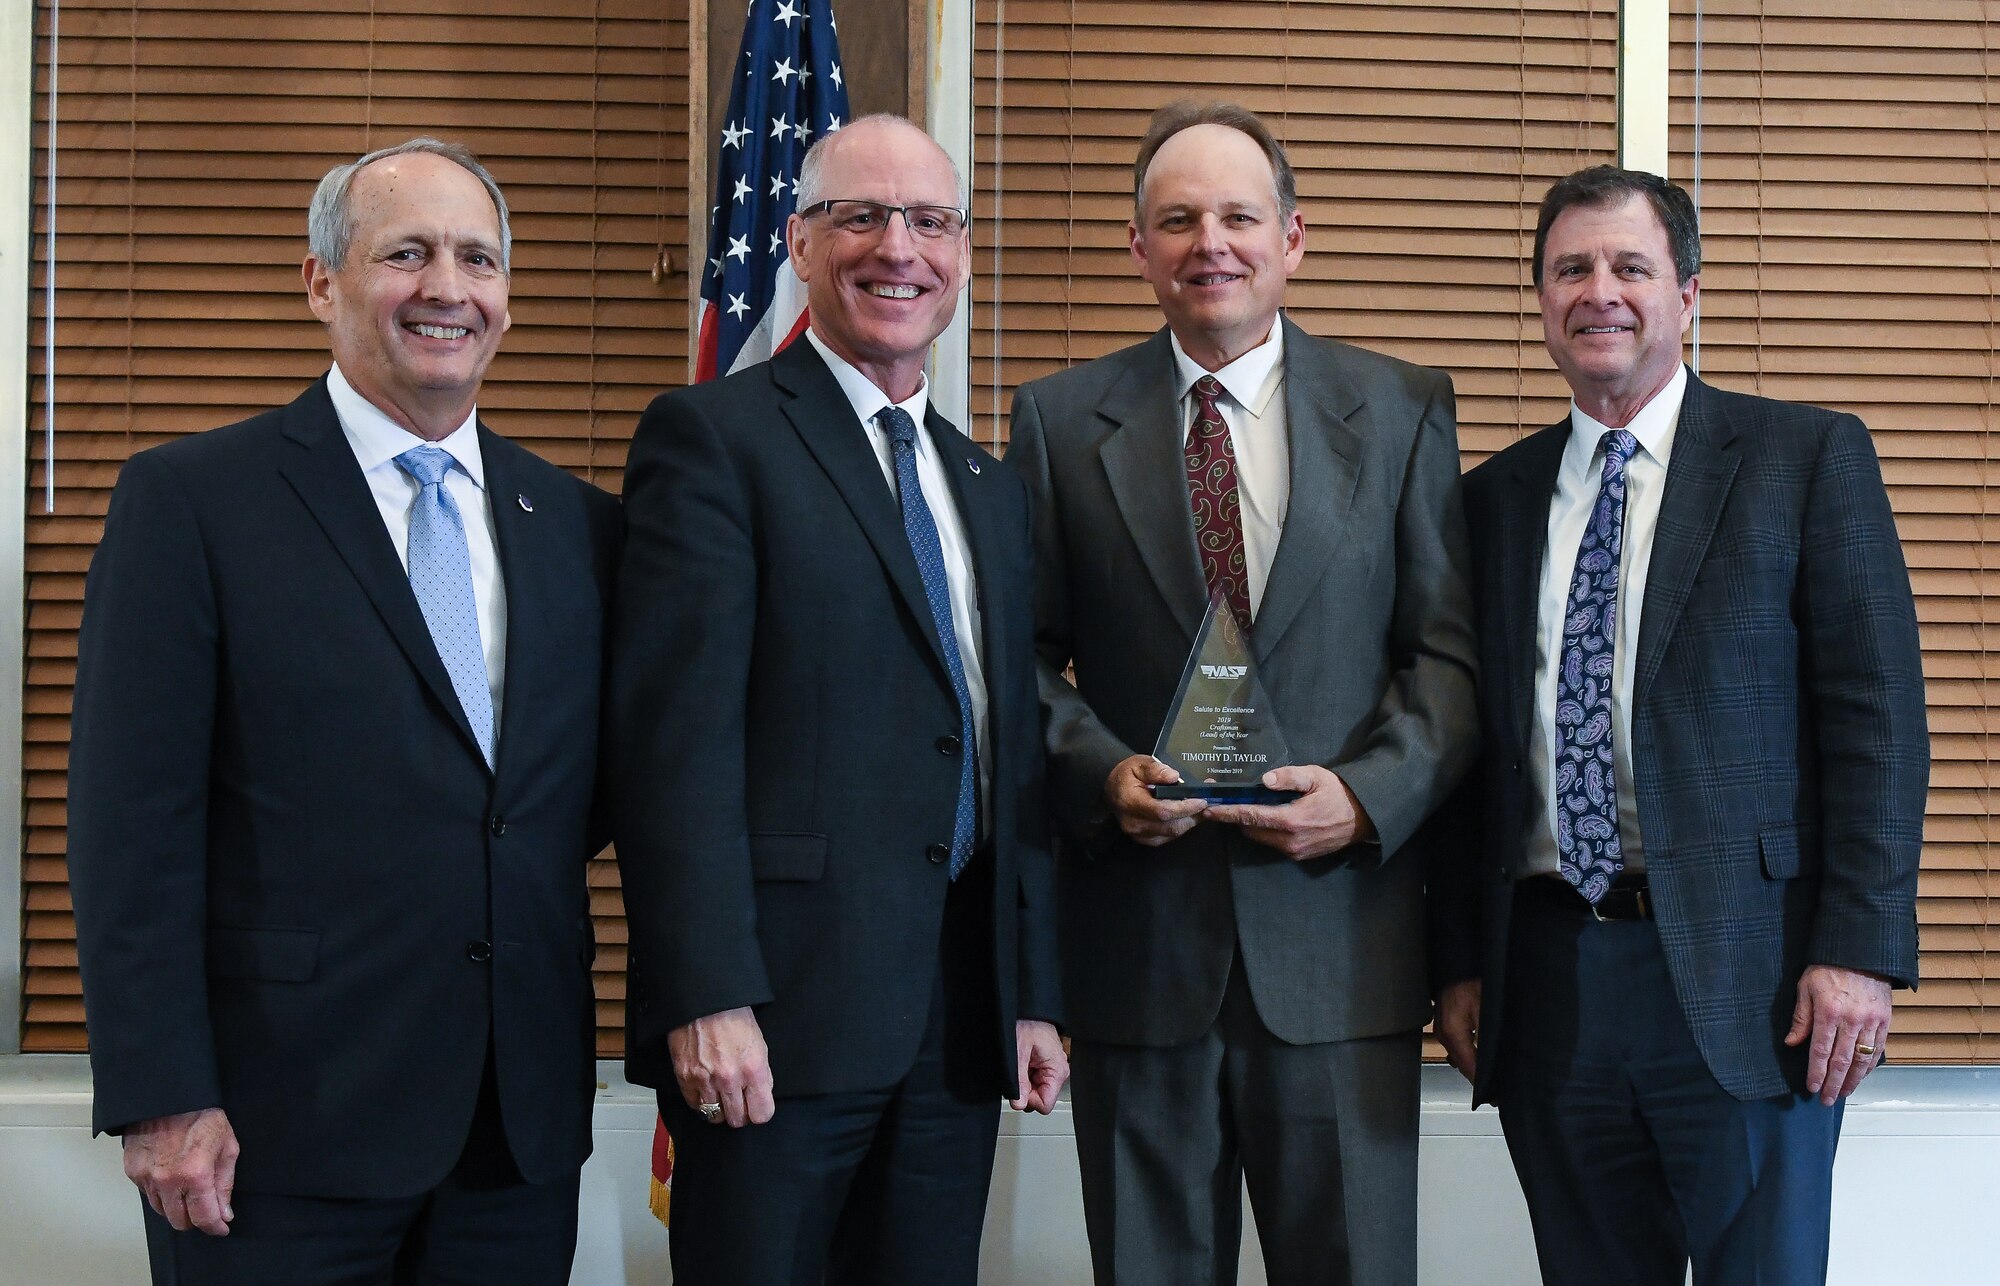 Boilermaker Lead Timothy Taylor, third from left, receives the Craftsman Lead of the Year during the National Aerospace Solutions (NAS), LLC, Salute to Excellence Annual Awards Banquet, Nov. 5, 2019, at the Arnold Lakeside Center, Arnold Air Force Base, Tenn. Also pictured, from left, is NAS Deputy General Manager Michael Belzil, NAS General Manager Dr. Richard Tighe and NAS Integrated Resources Director Kevin Chalmers. (U.S. Air Force photo by Jill Pickett)